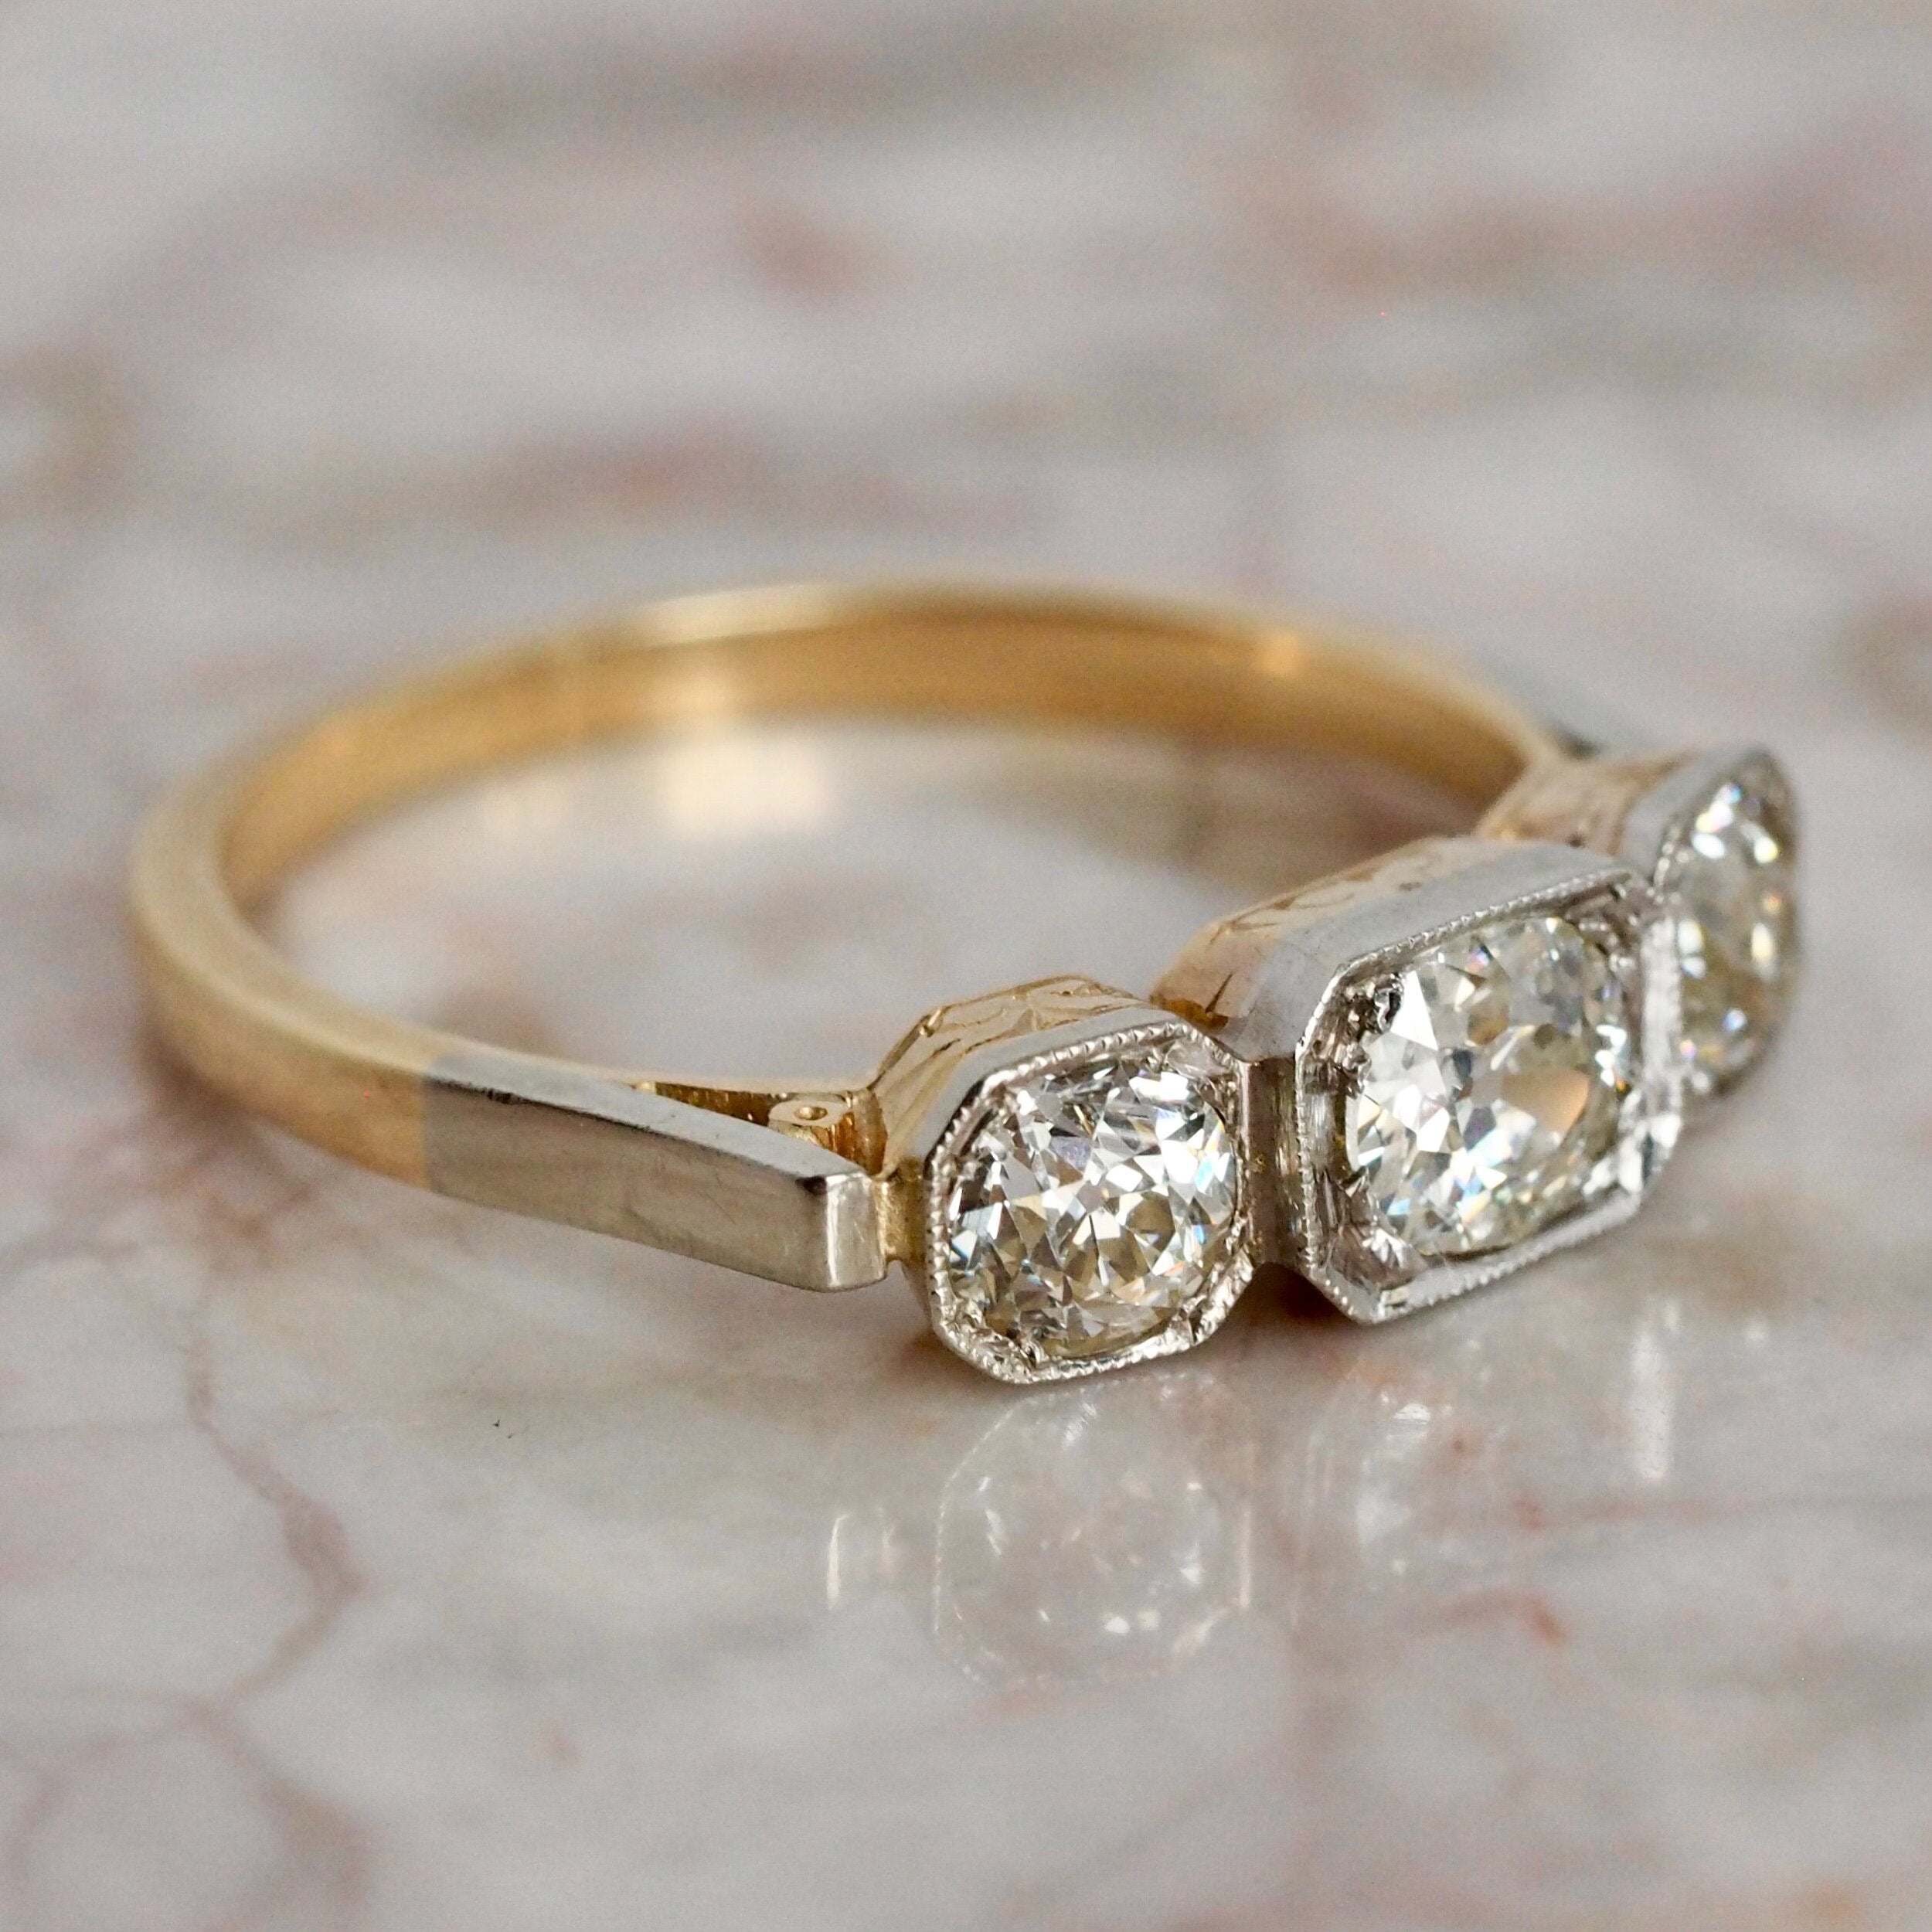 Early Art Deco 14k Gold Old European Cut Diamond Trilogy Engagement Ring